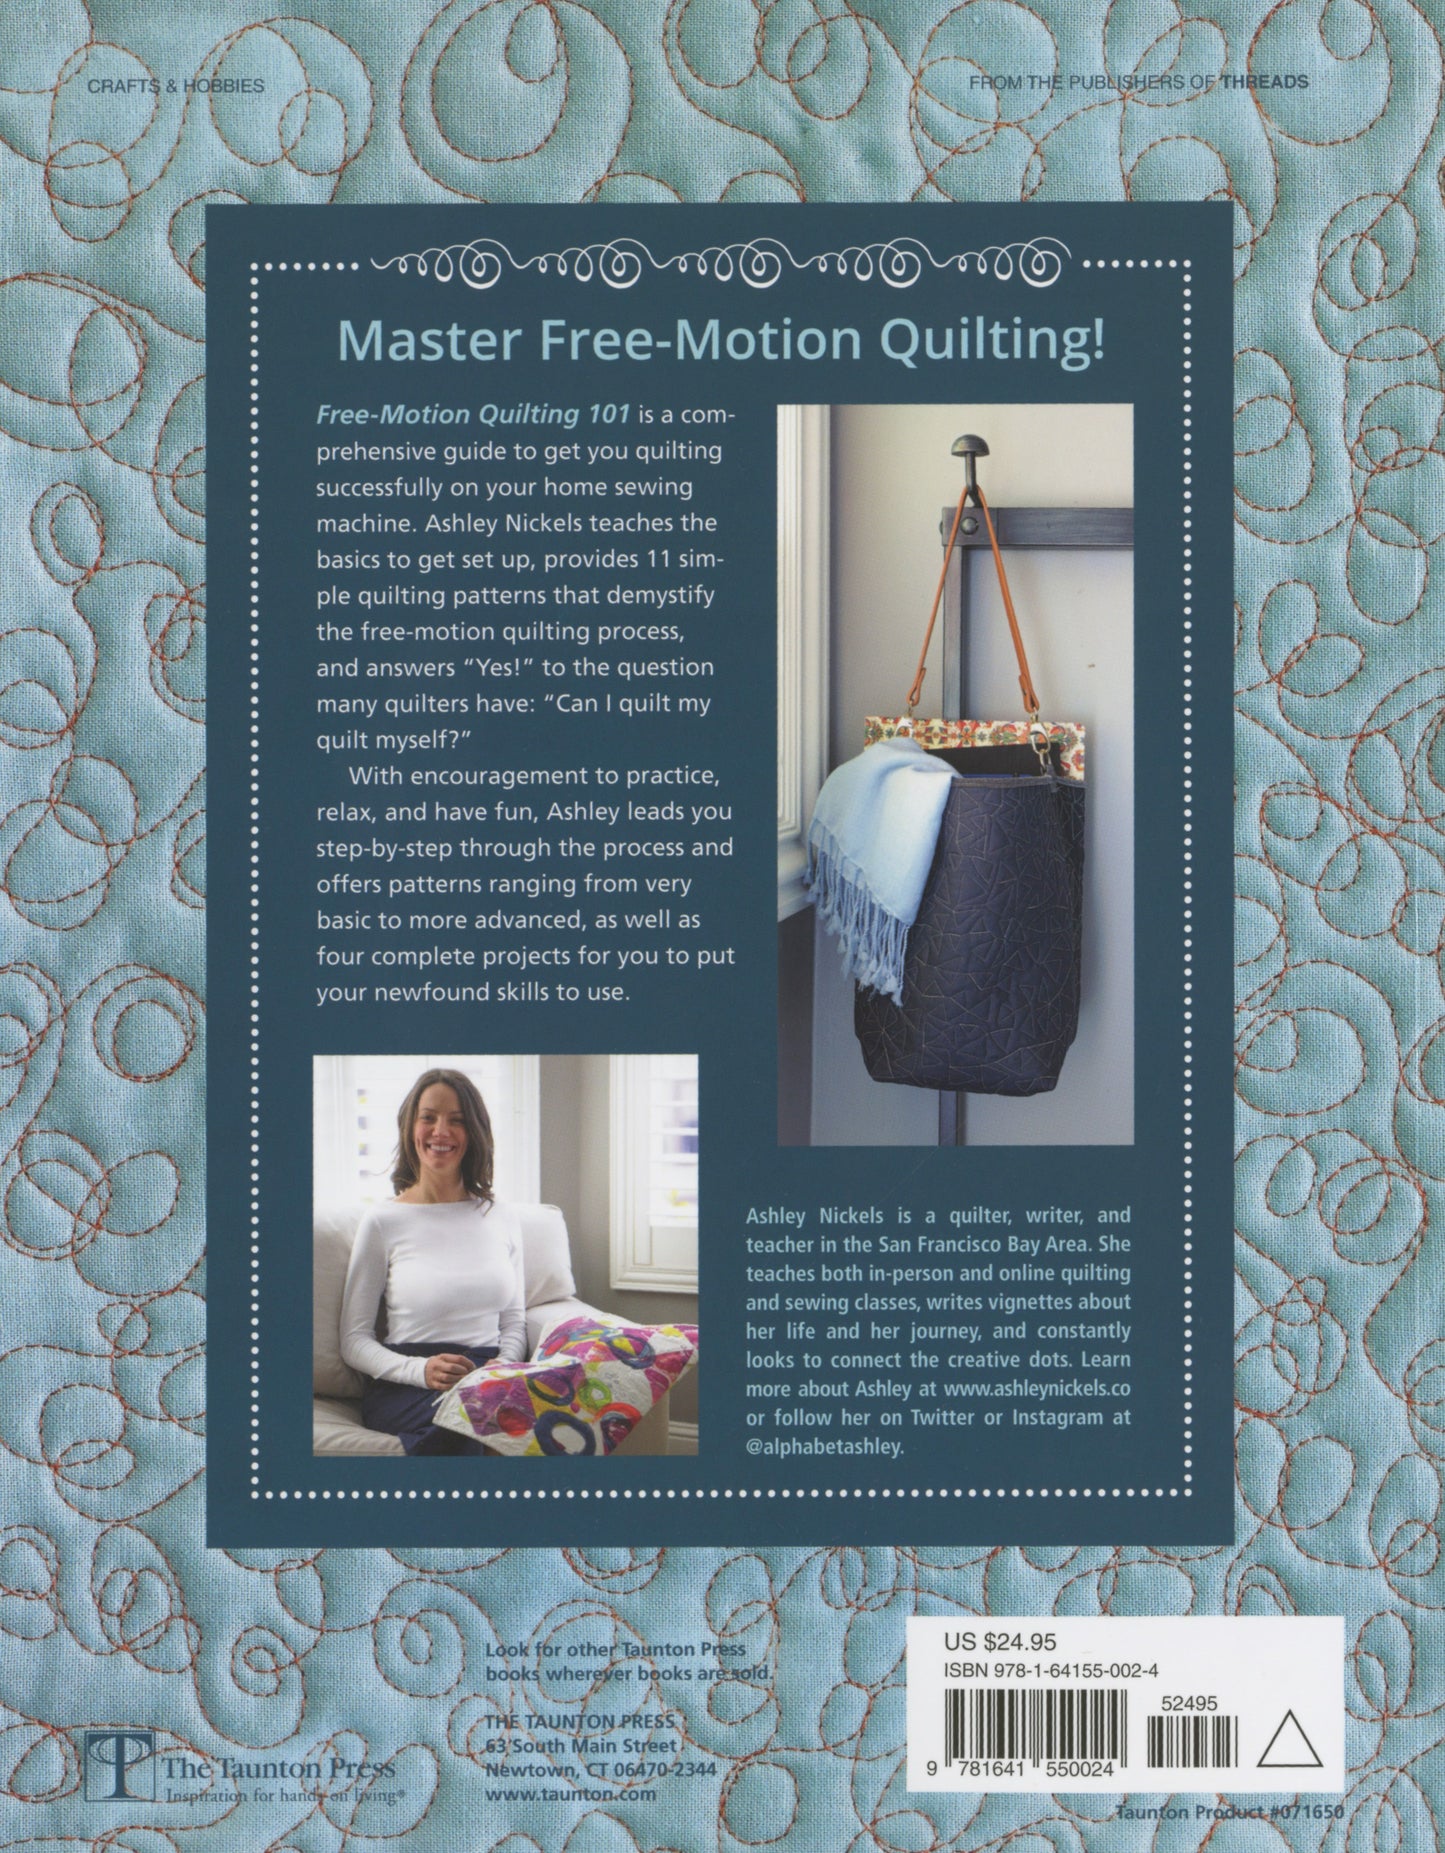 Free Motion Quilting 101 by Ashley Nickles